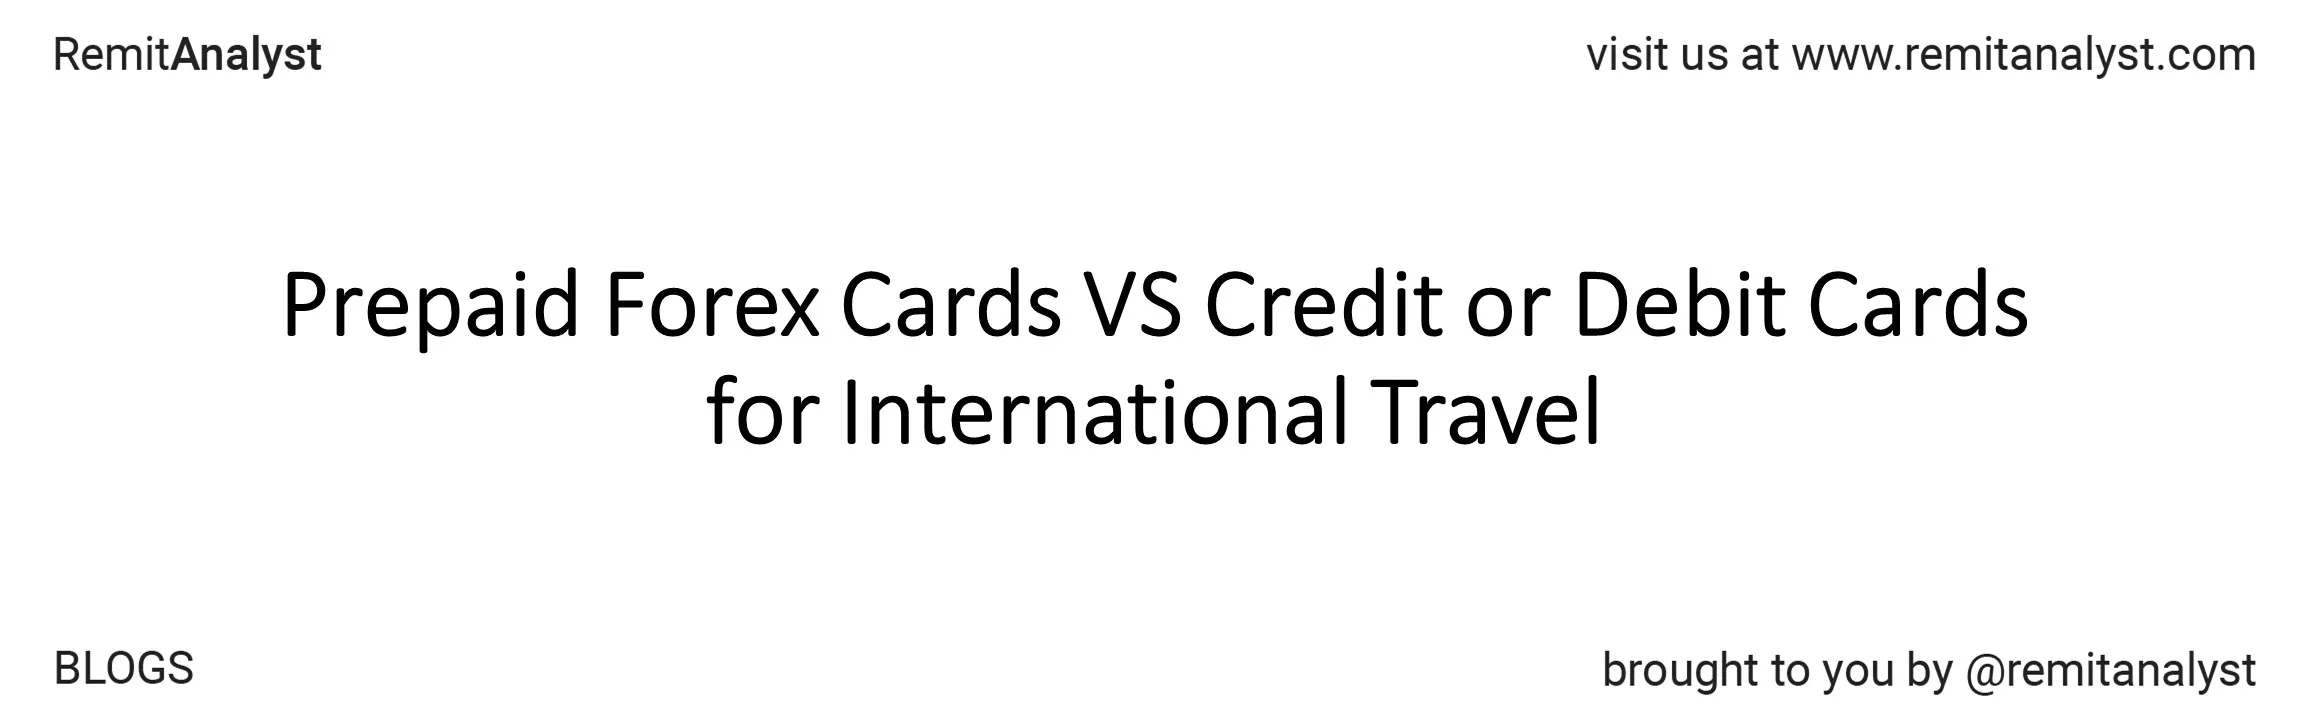 difference-between-forex-credit-debit-for-internationals-title